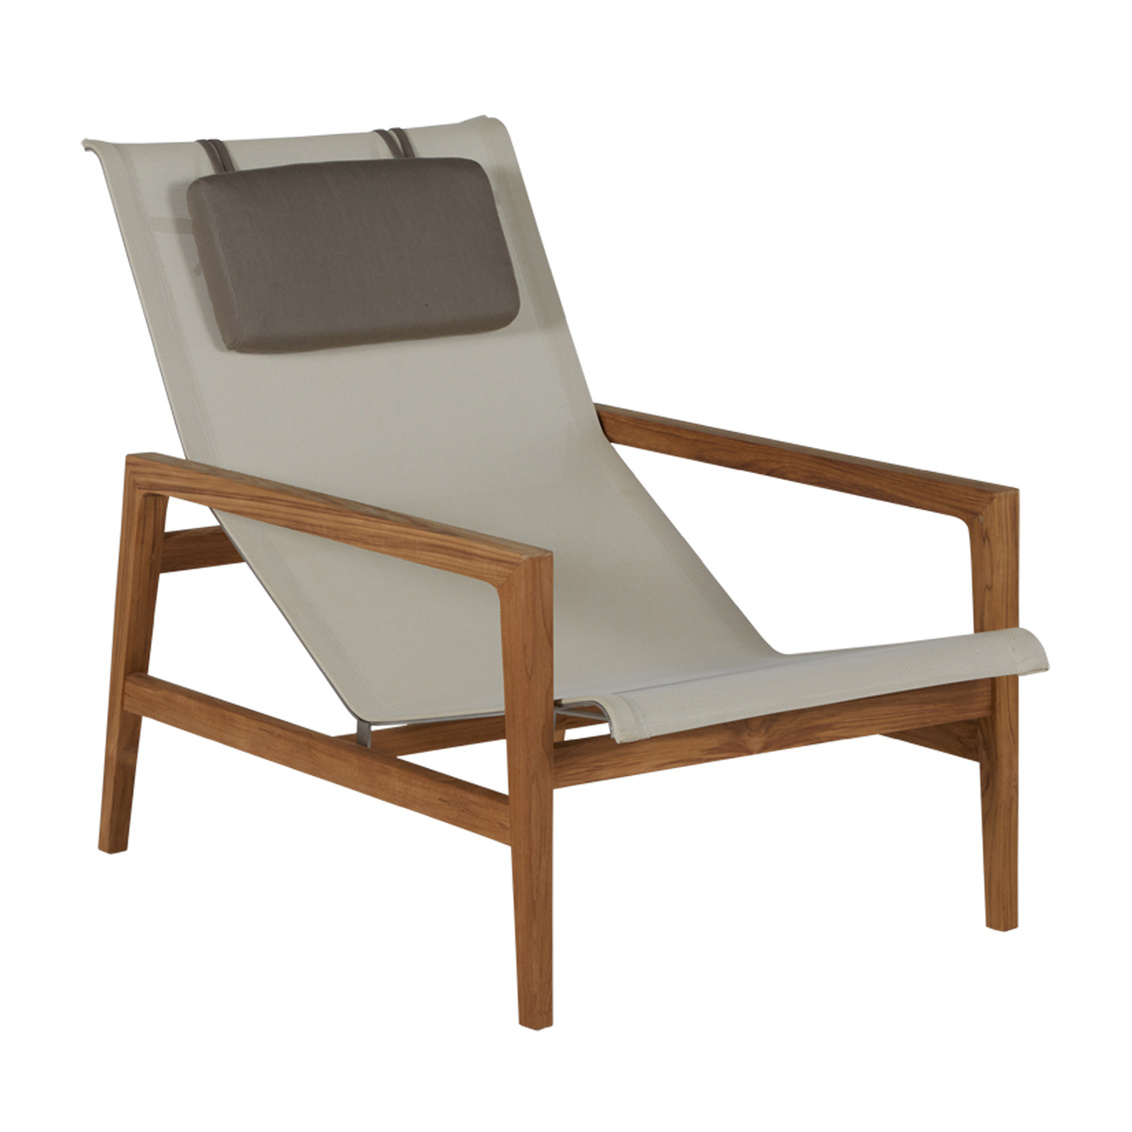 coast teak easy chair in natural teak – frame only product image